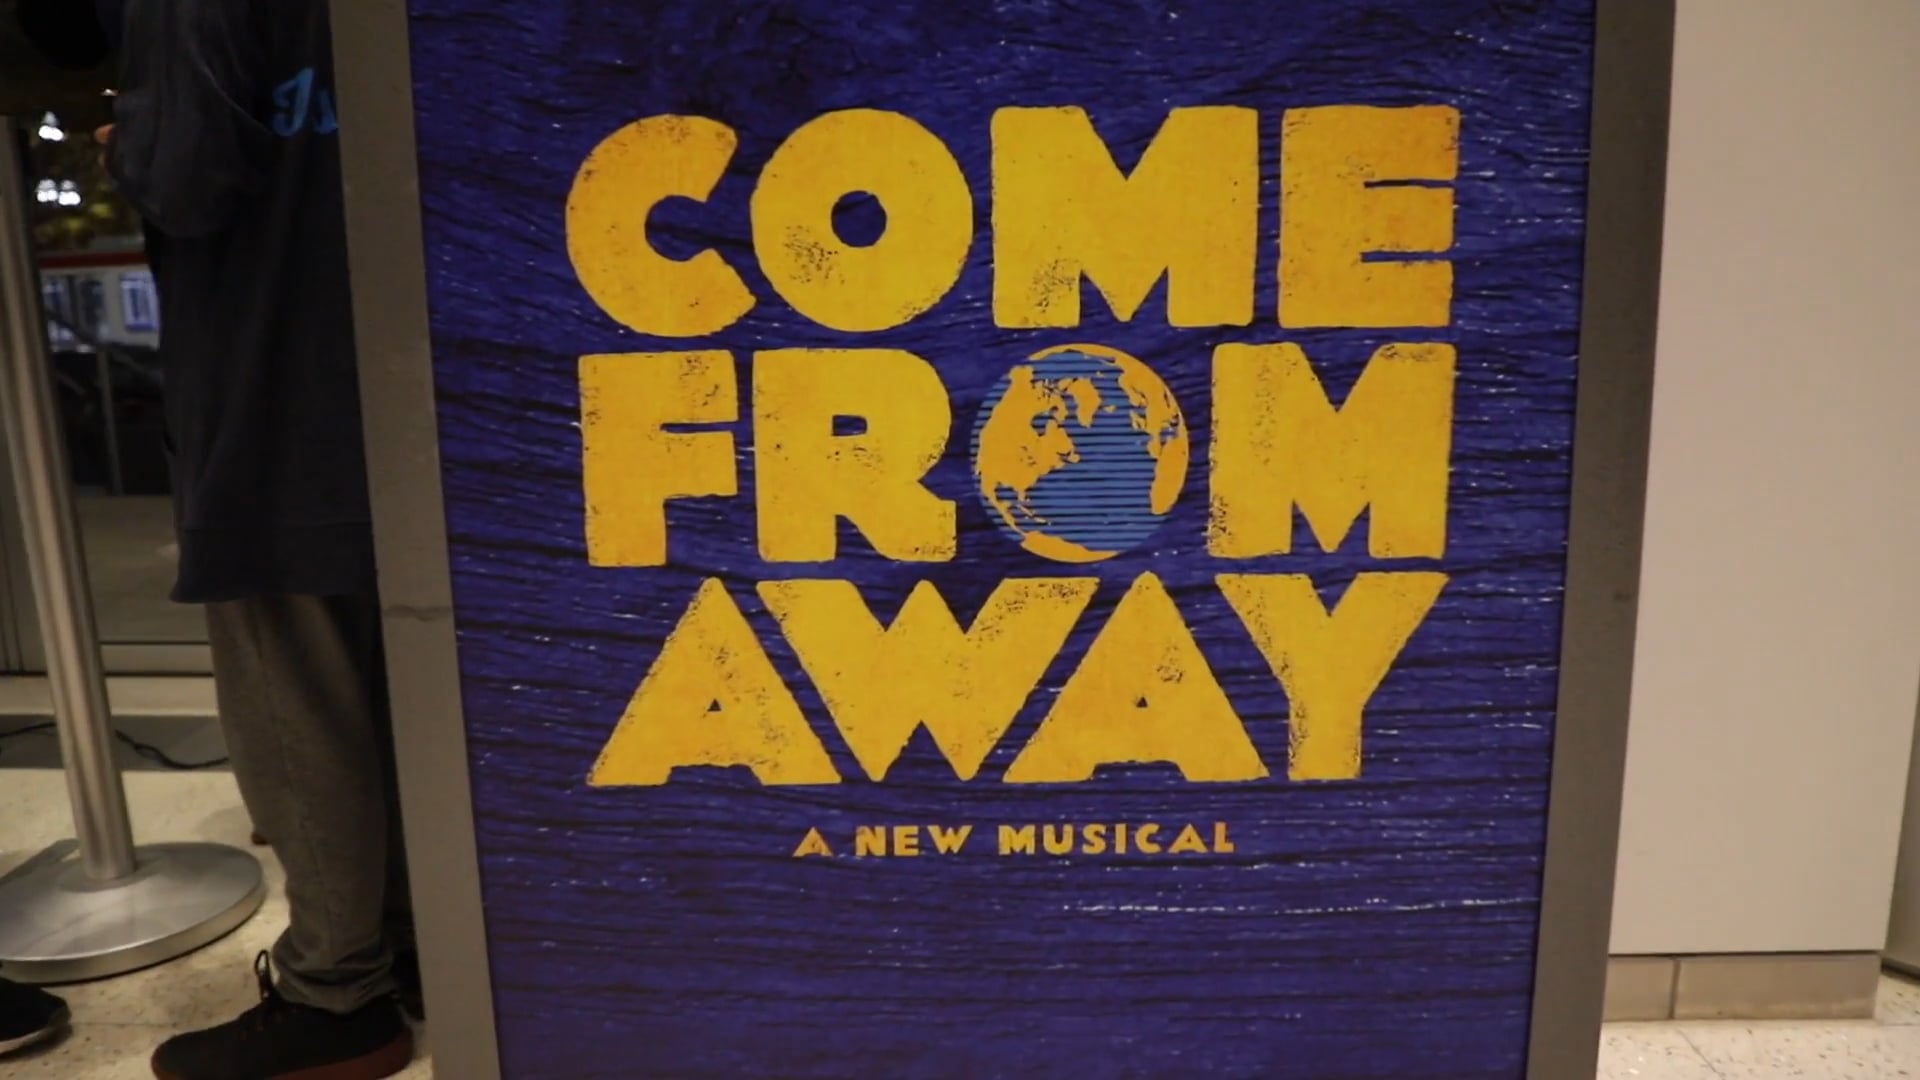 Broadway At The Eccles Presents "Come From Away" First National Tour